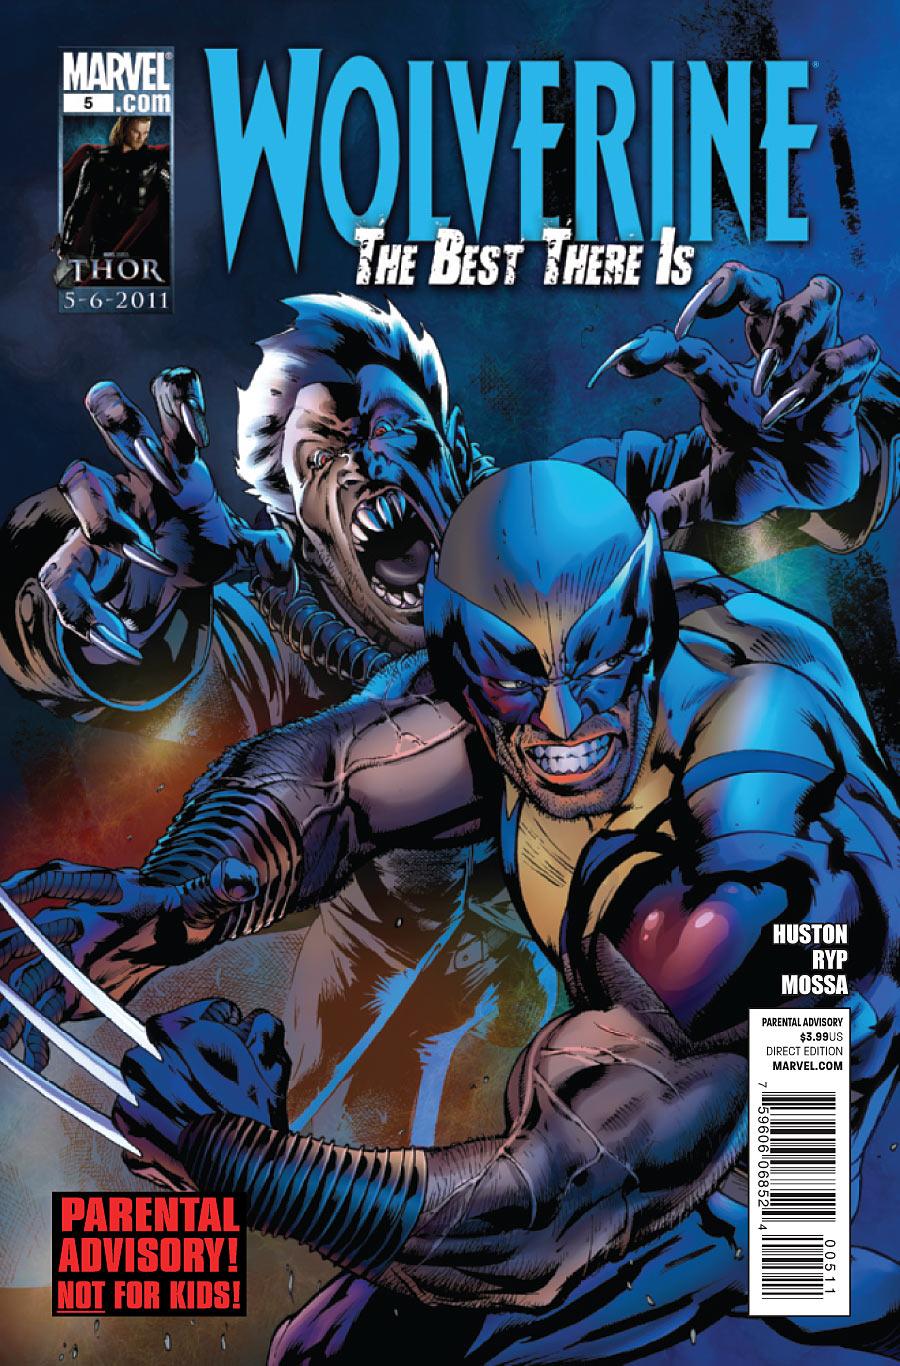 Wolverine: The Best There Is Vol. 1 #5